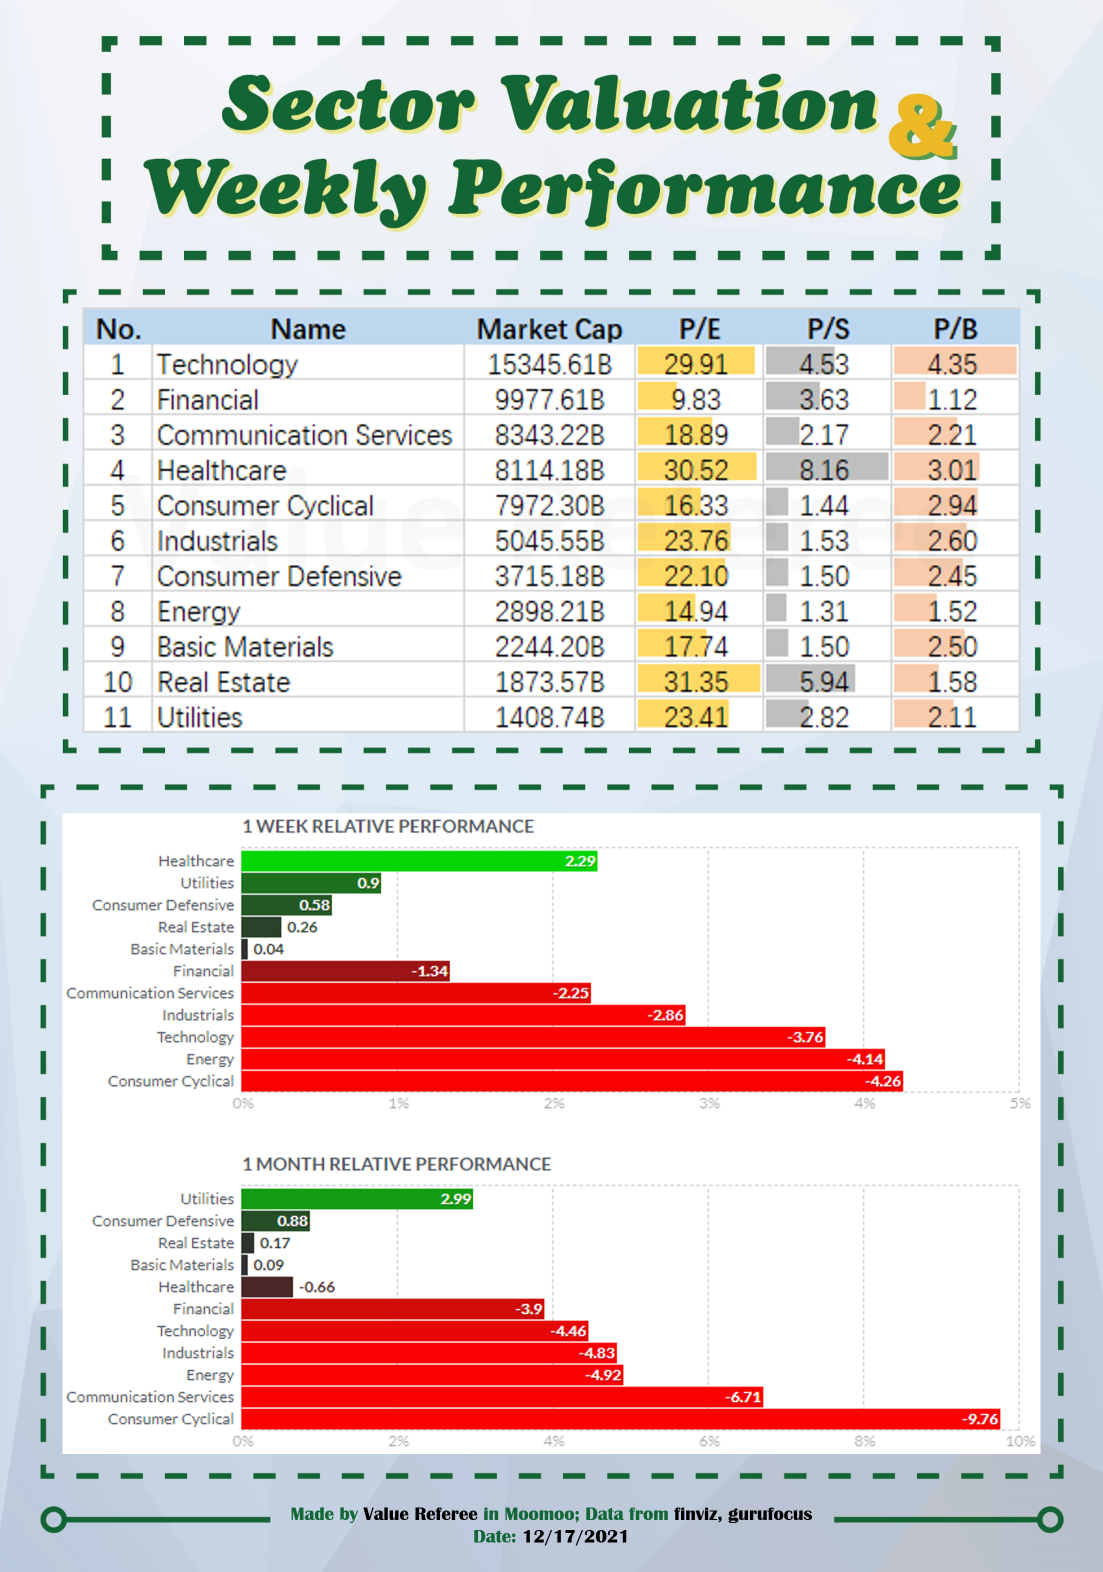 Sector Valuation & Weekly Performance (12/17)